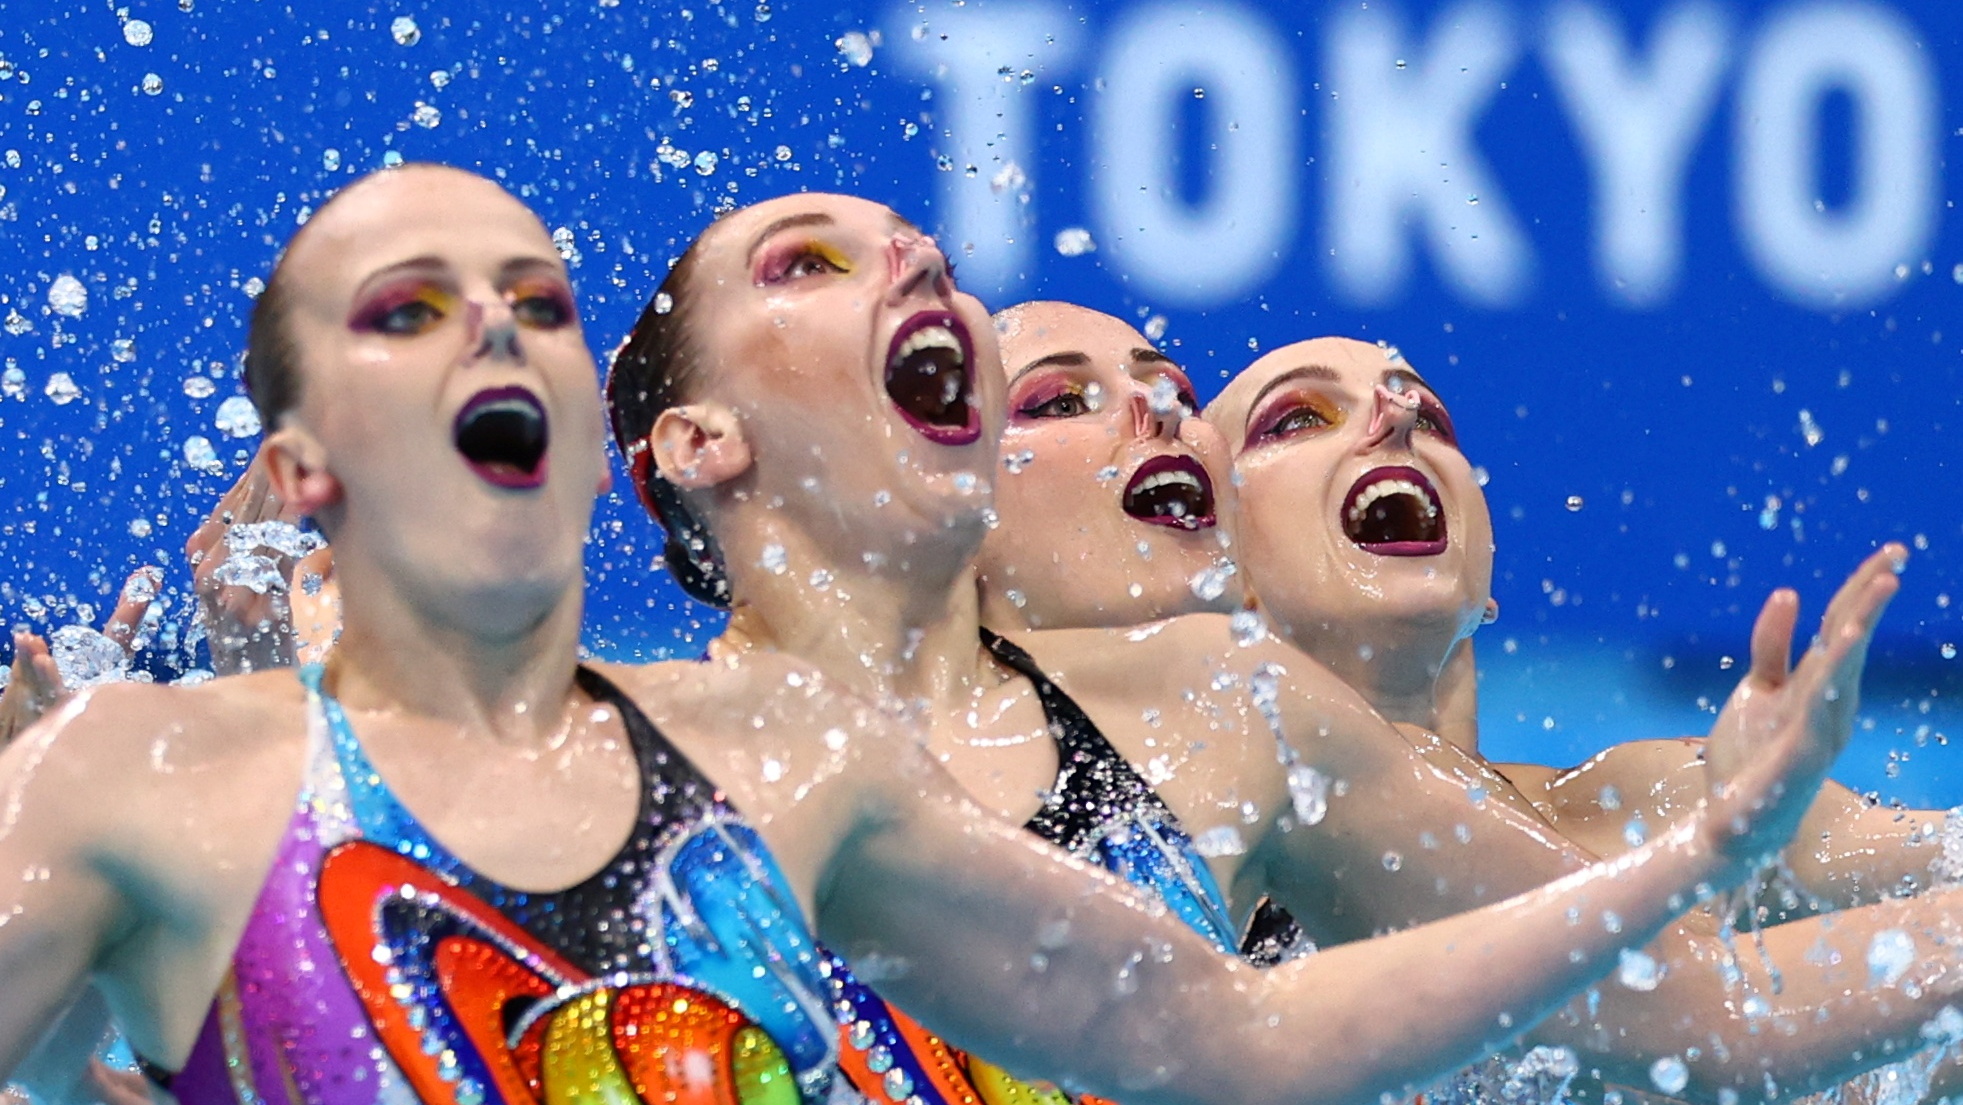 Tokyo 2020 Olympics - Artistic Swimming - Women's Team Free Routine - Final - Tokyo Aquatics Centre, Tokyo, Japan - August 7, 2021.    Russian Olympic Committee team during their performance. REUTERS/Marko Djurica